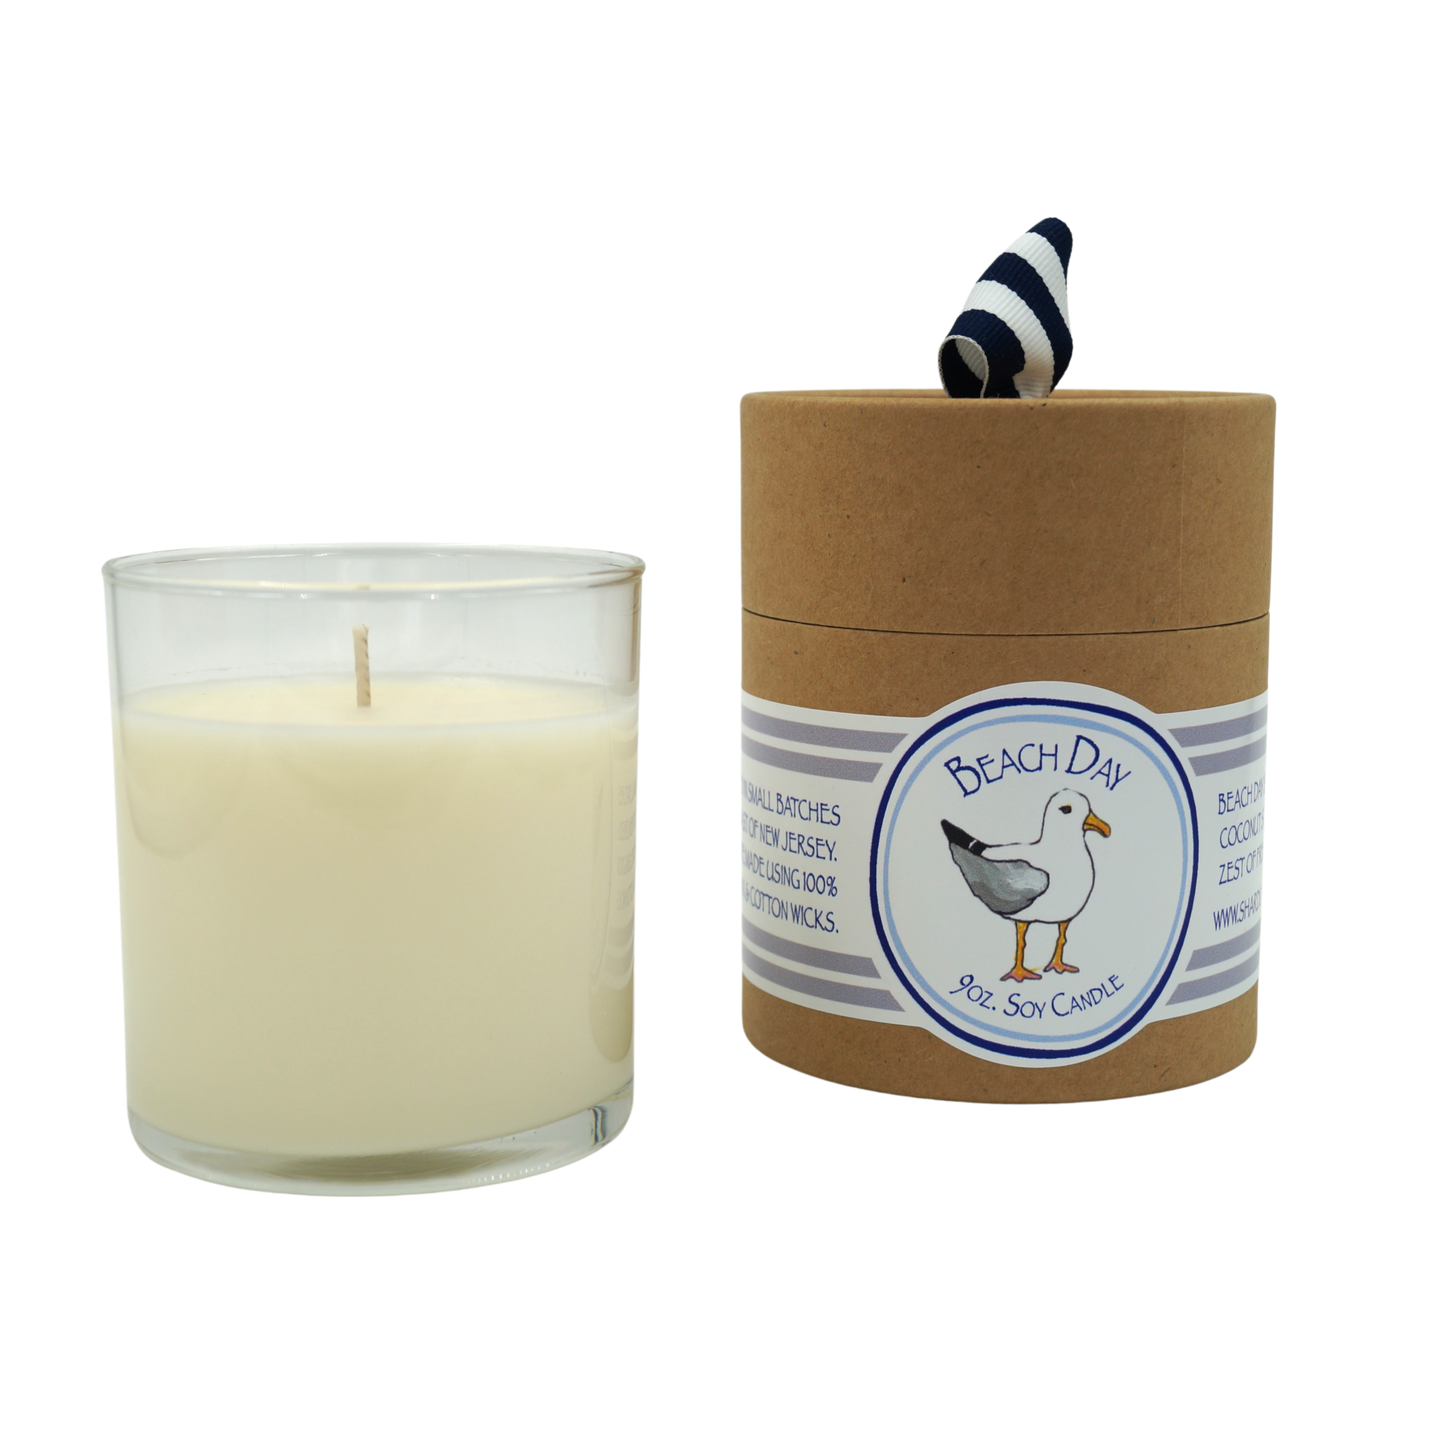 Beach Day Soy Candle